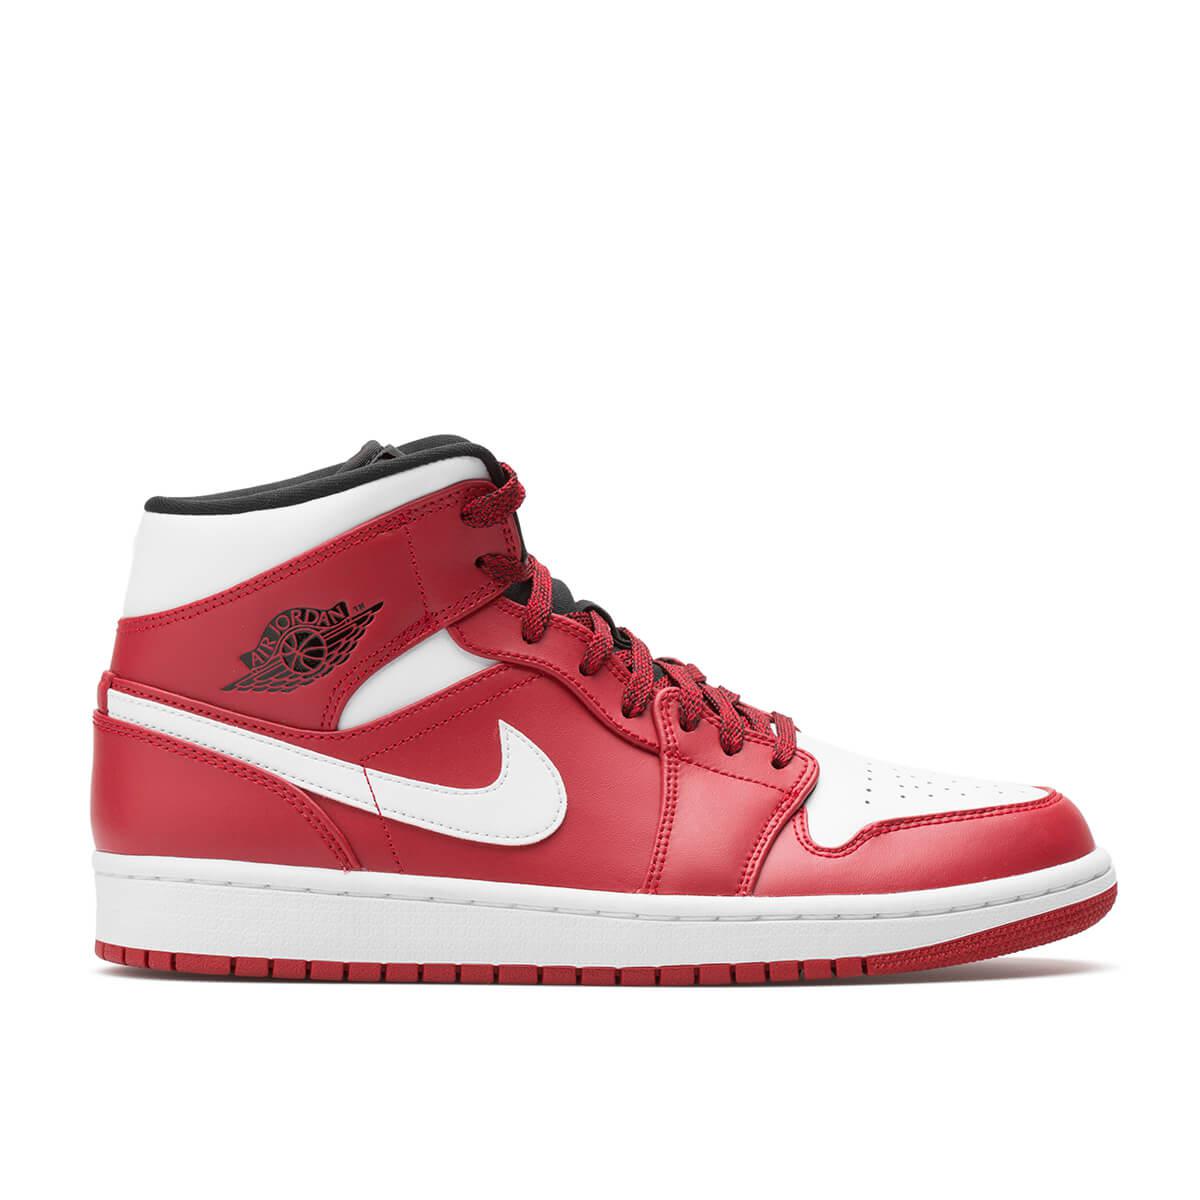 Nike Synthetic Air Jordan 1 Mid in Red for Men - Lyst